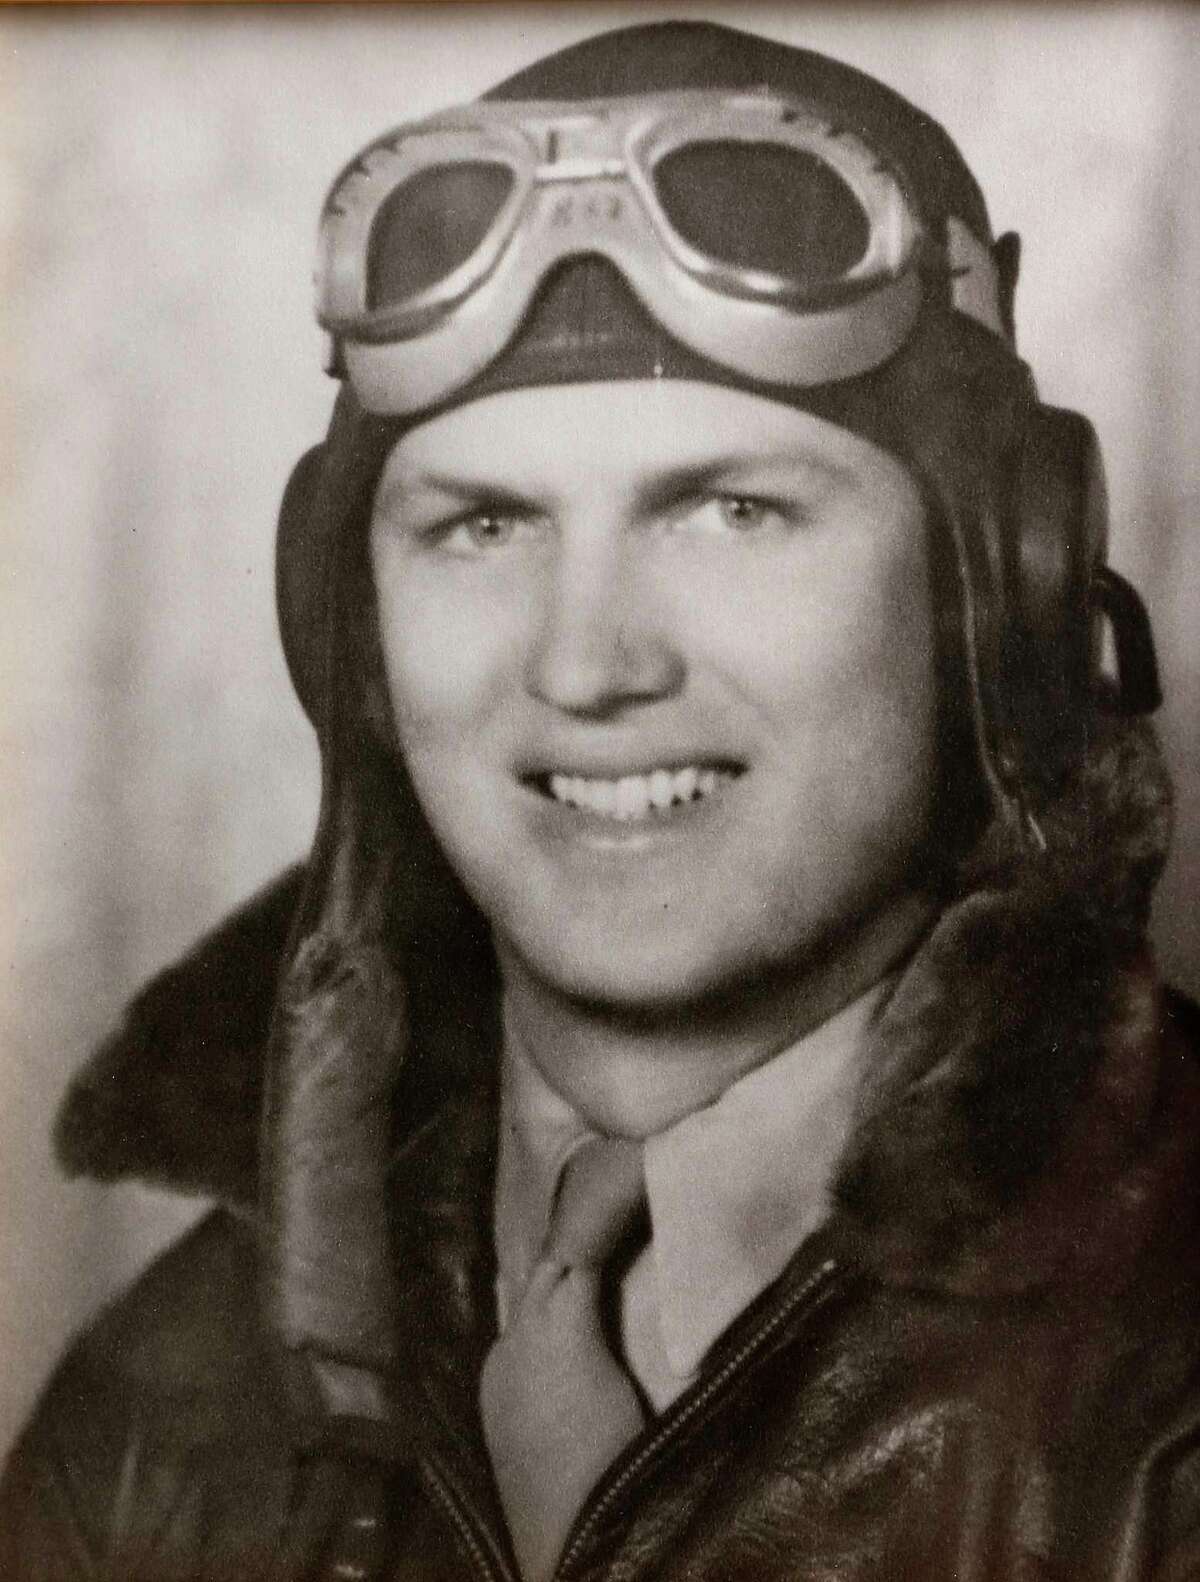 Bob Holley, age 22, a Lieutenant junior grade in the Navy during World War II. For Native Texan. ( Courtesy photo from Bob Holley)